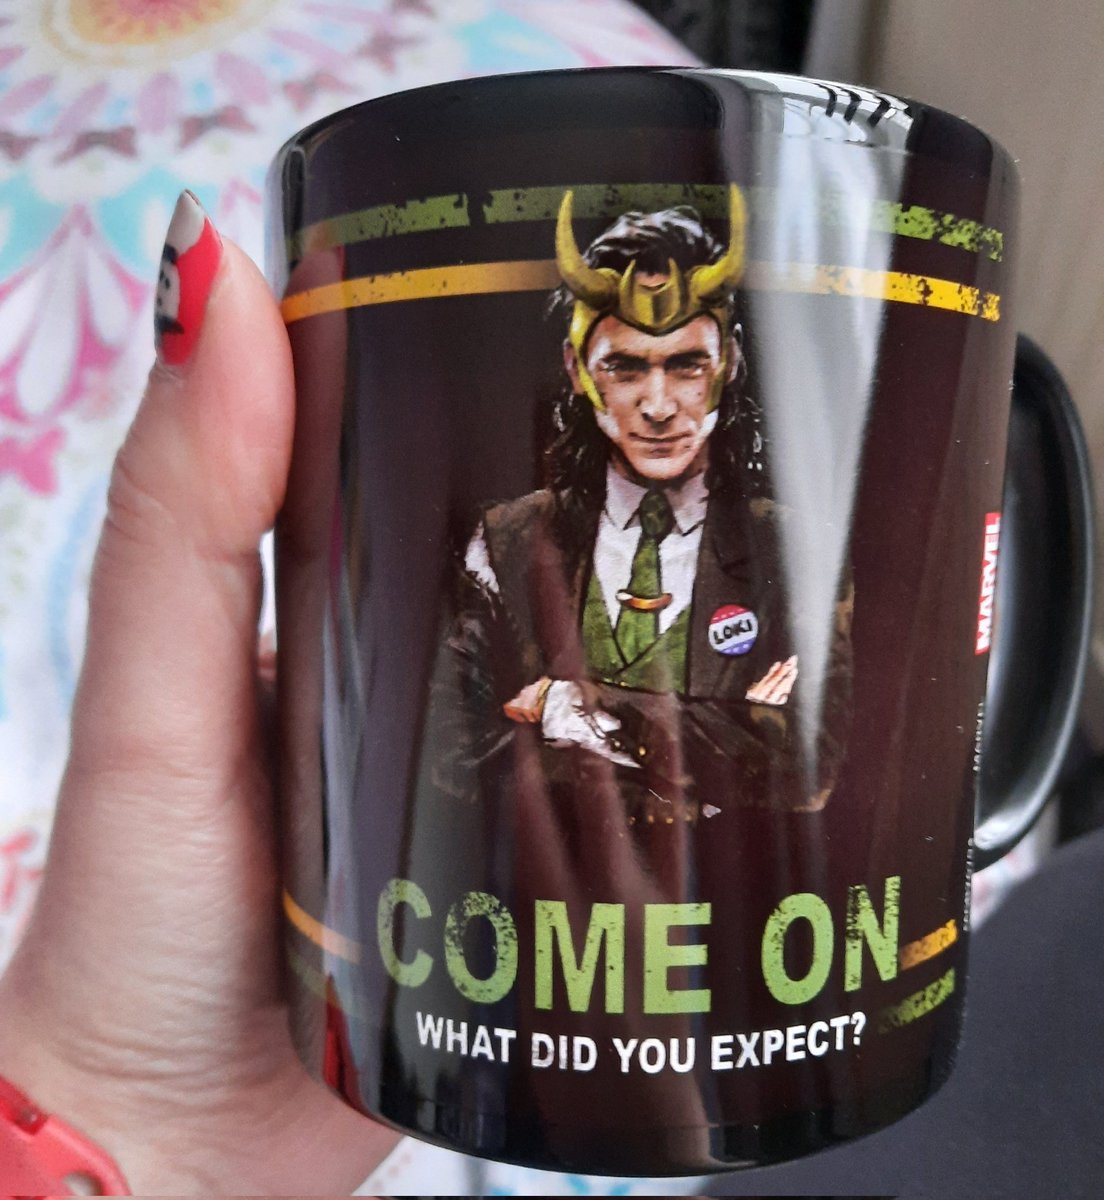 RT @LokisNokia: Oh yeah, my President Loki and Party Thor cups https://t.co/gOYpP1vNCE